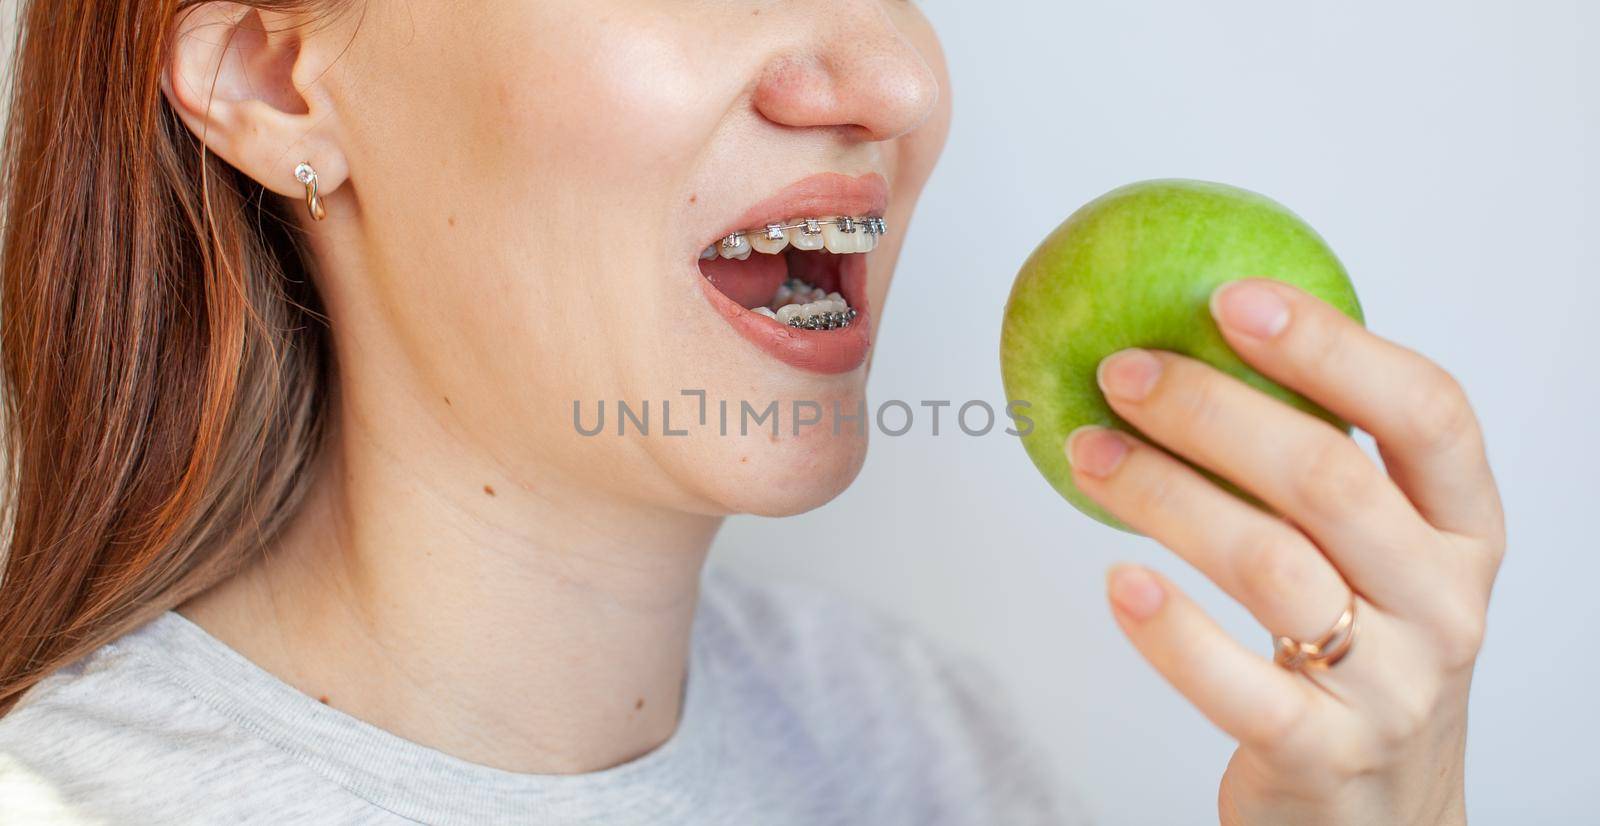 A girl with braces on her teeth wants to bite a green apple. Close-up photos of teeth and lips. Smooth teeth from braces. Photo on a light solid background.